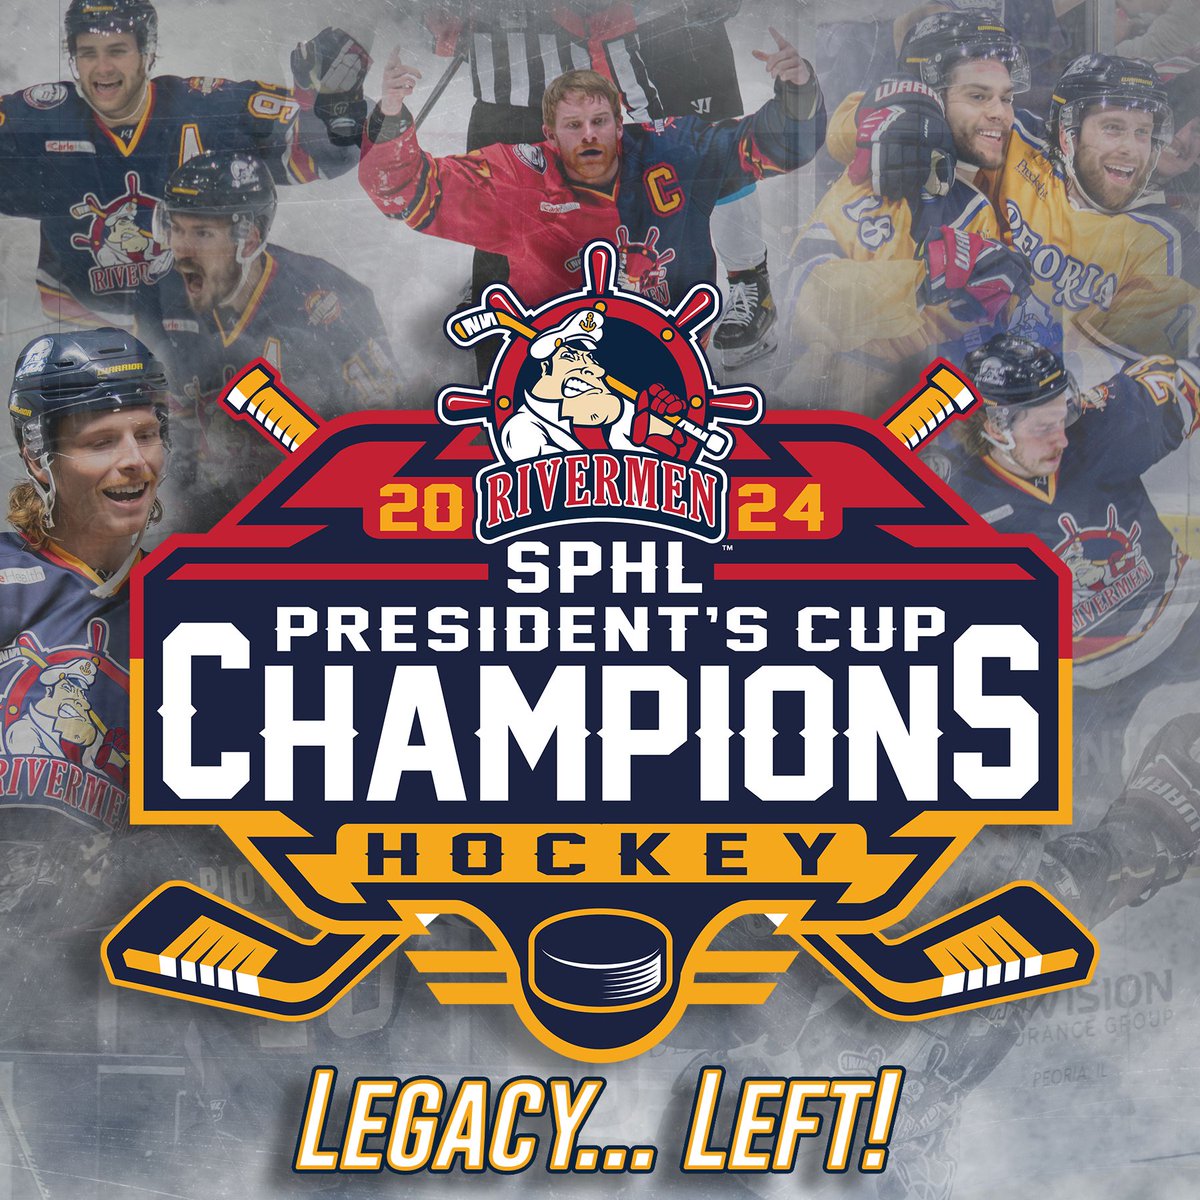 THE PEORIA RIVERMEN ARE PRESIDENT'S CUP CHAMPIONS!!!!!
5-1 FINAL AGAINST HUNTSVILLE ON HOME ICE! #HoistTheColors